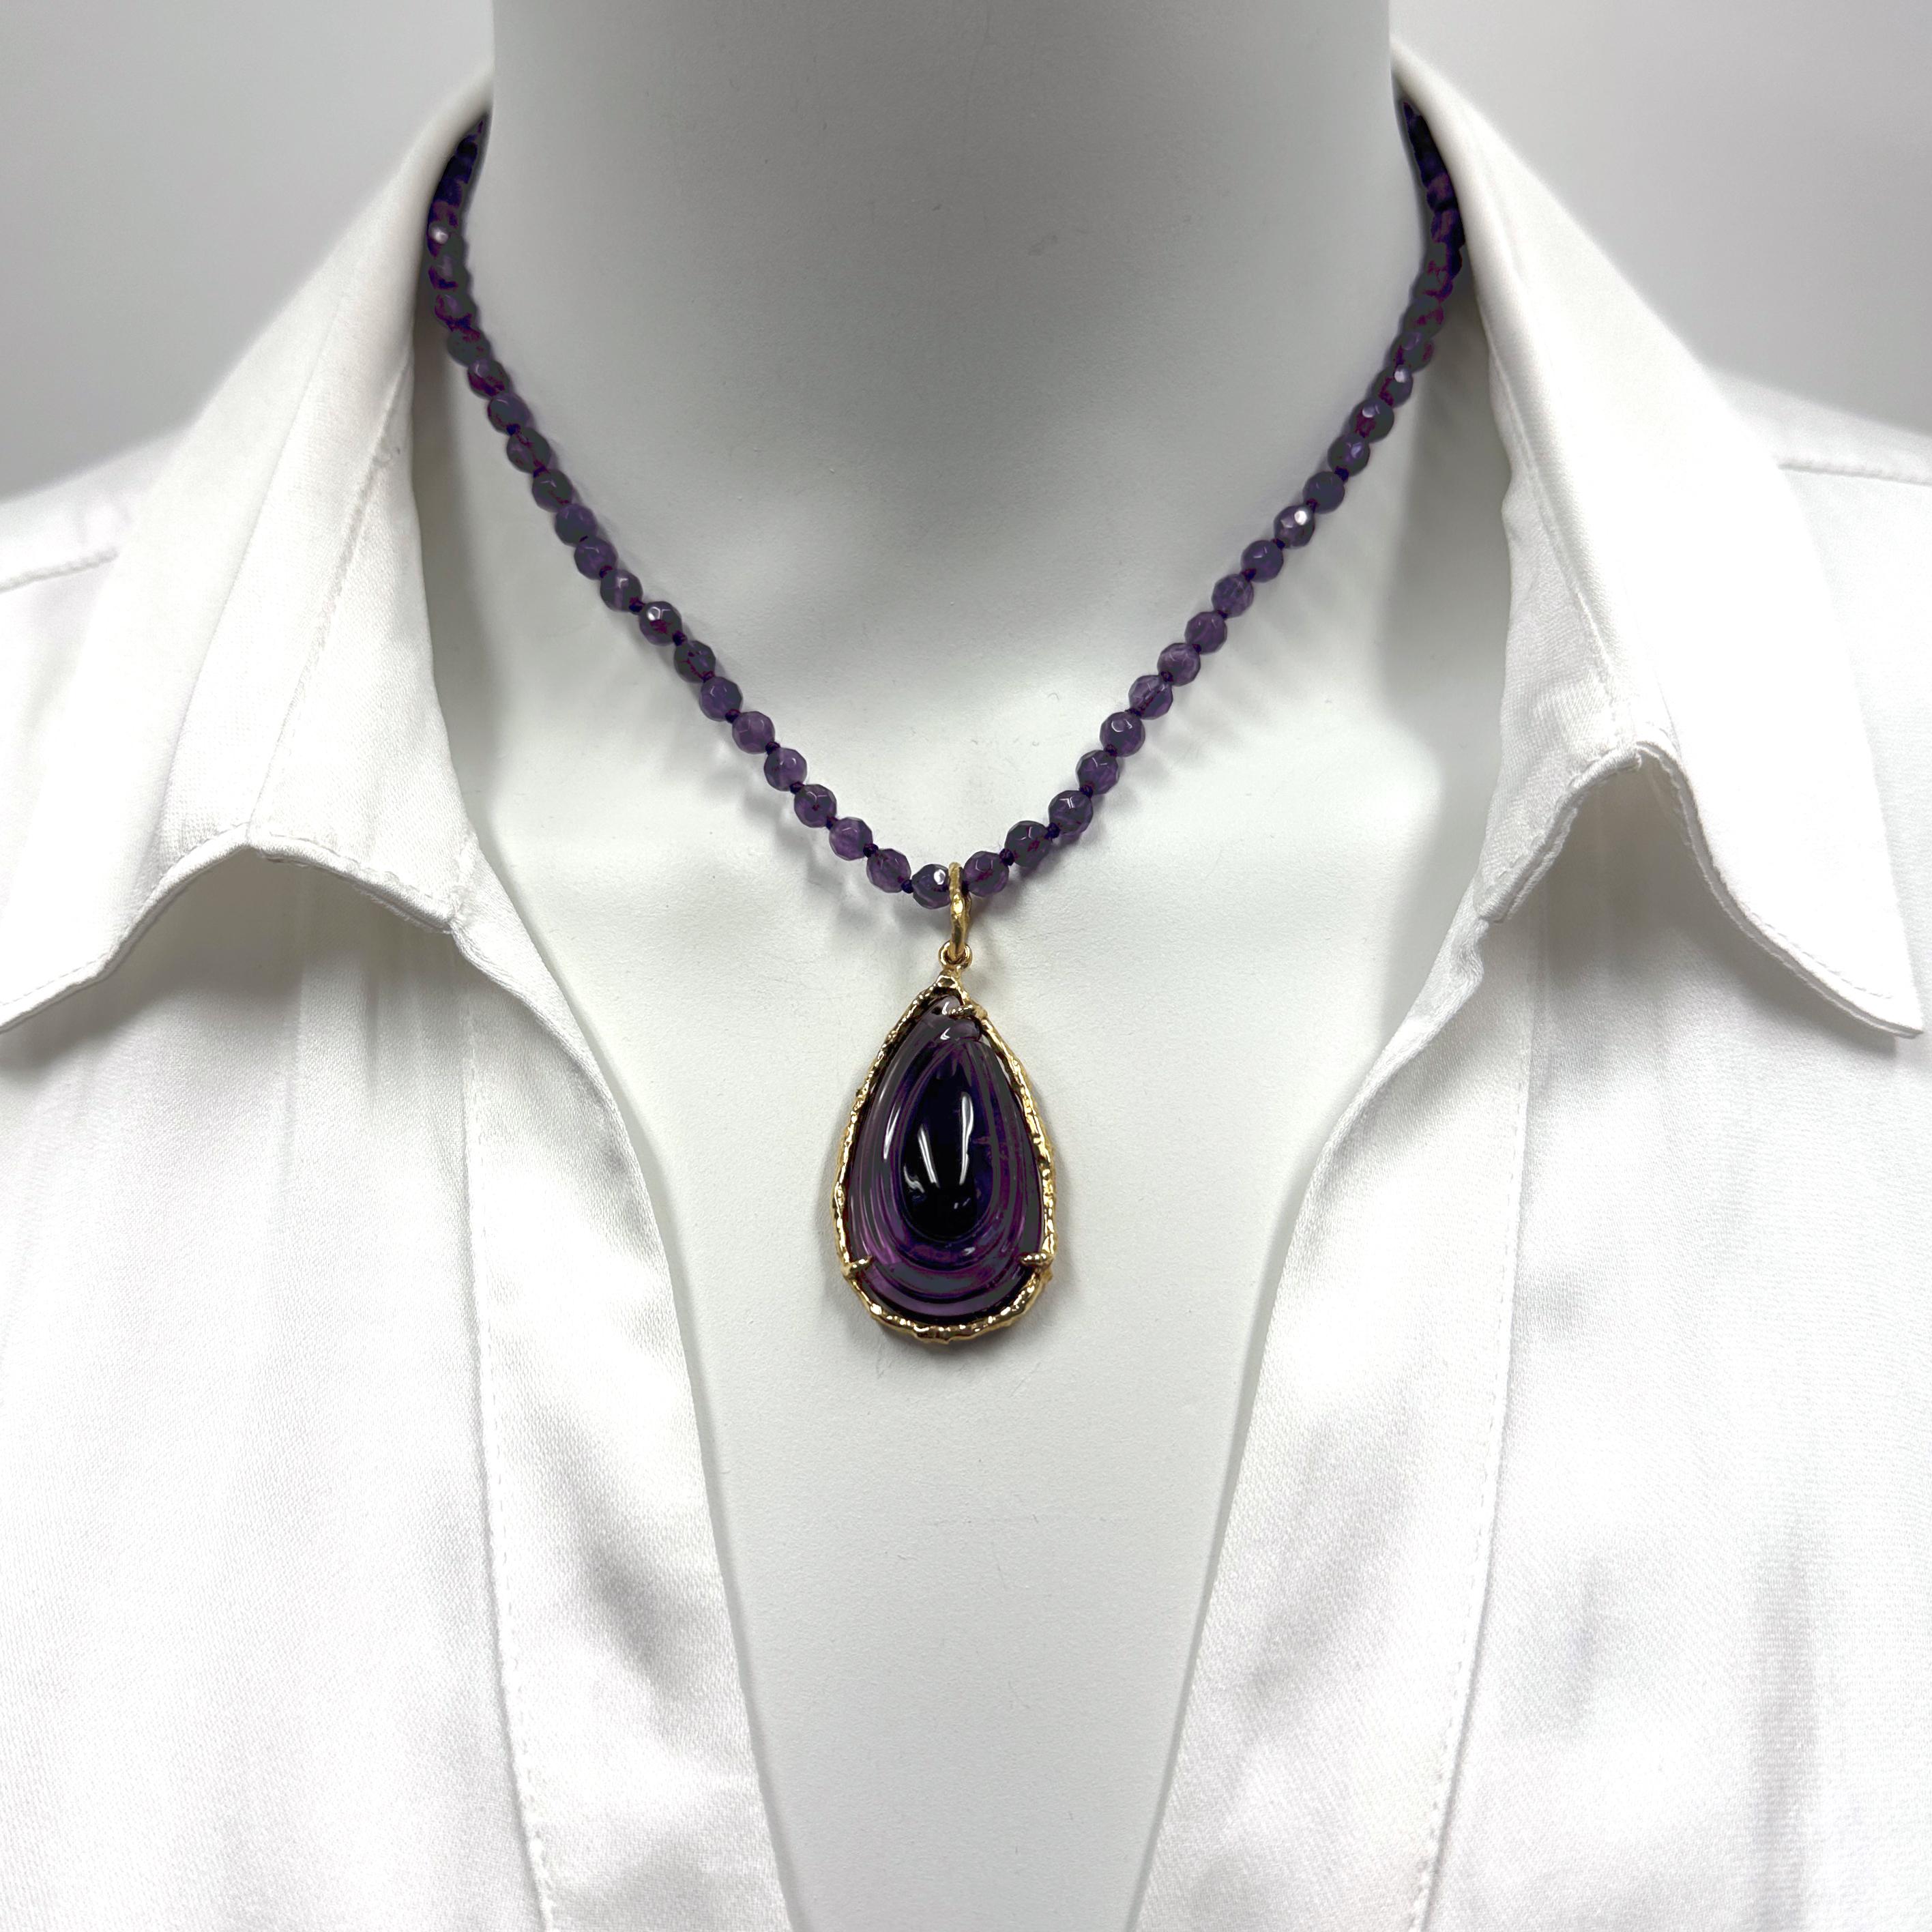 39 Carat Carved Amethyst Pendant in 18K Gold on Convertible Amethyst Bead Chain For Sale 4